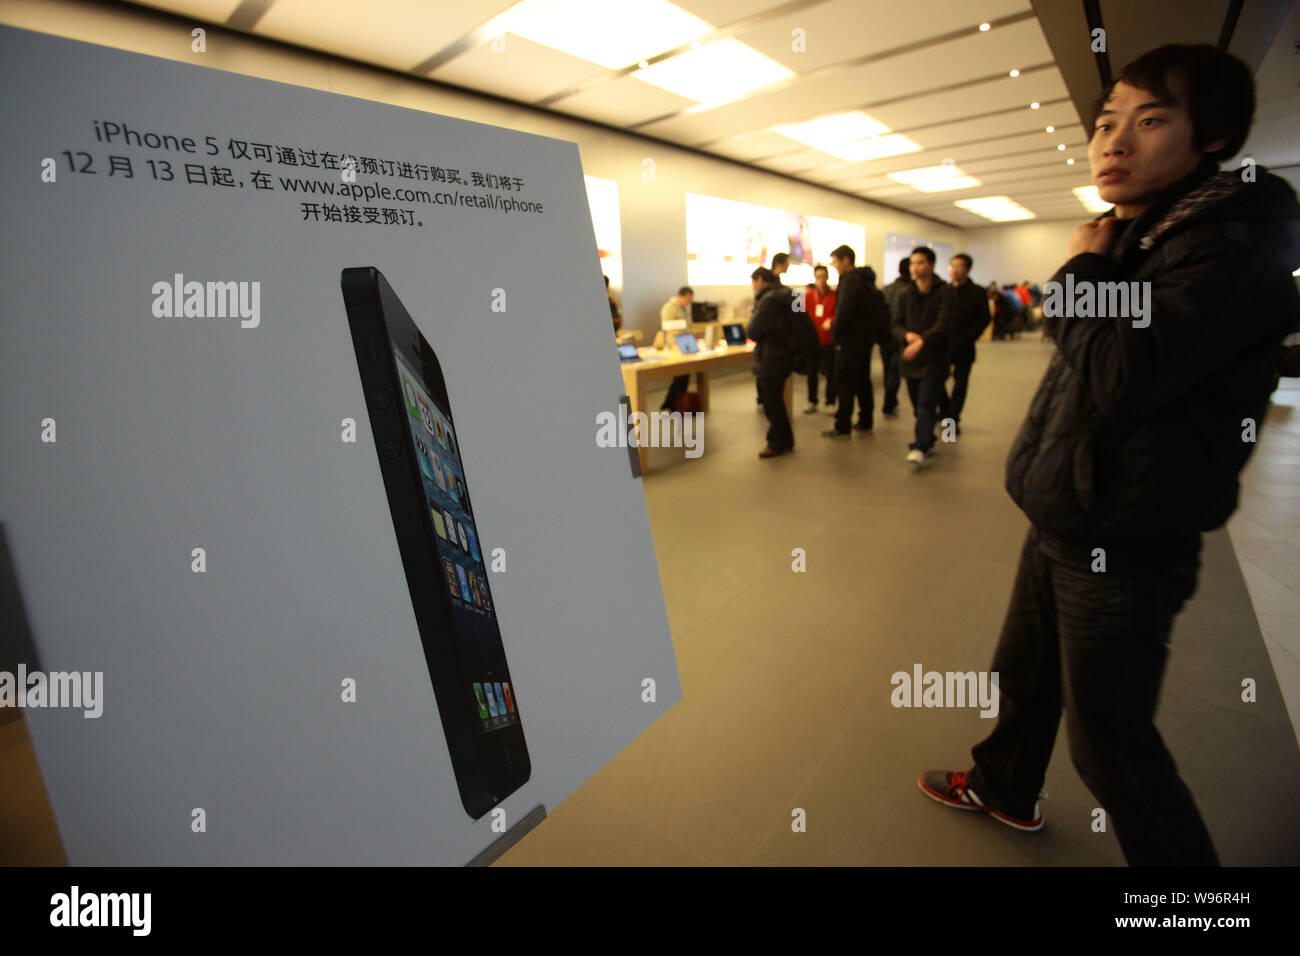 Customers Walk Past An Advertising Poster Of The Iphone 5 Smartphone At An Apple Store In Shanghai China 13 December 12 The China Release Of It Stock Photo Alamy